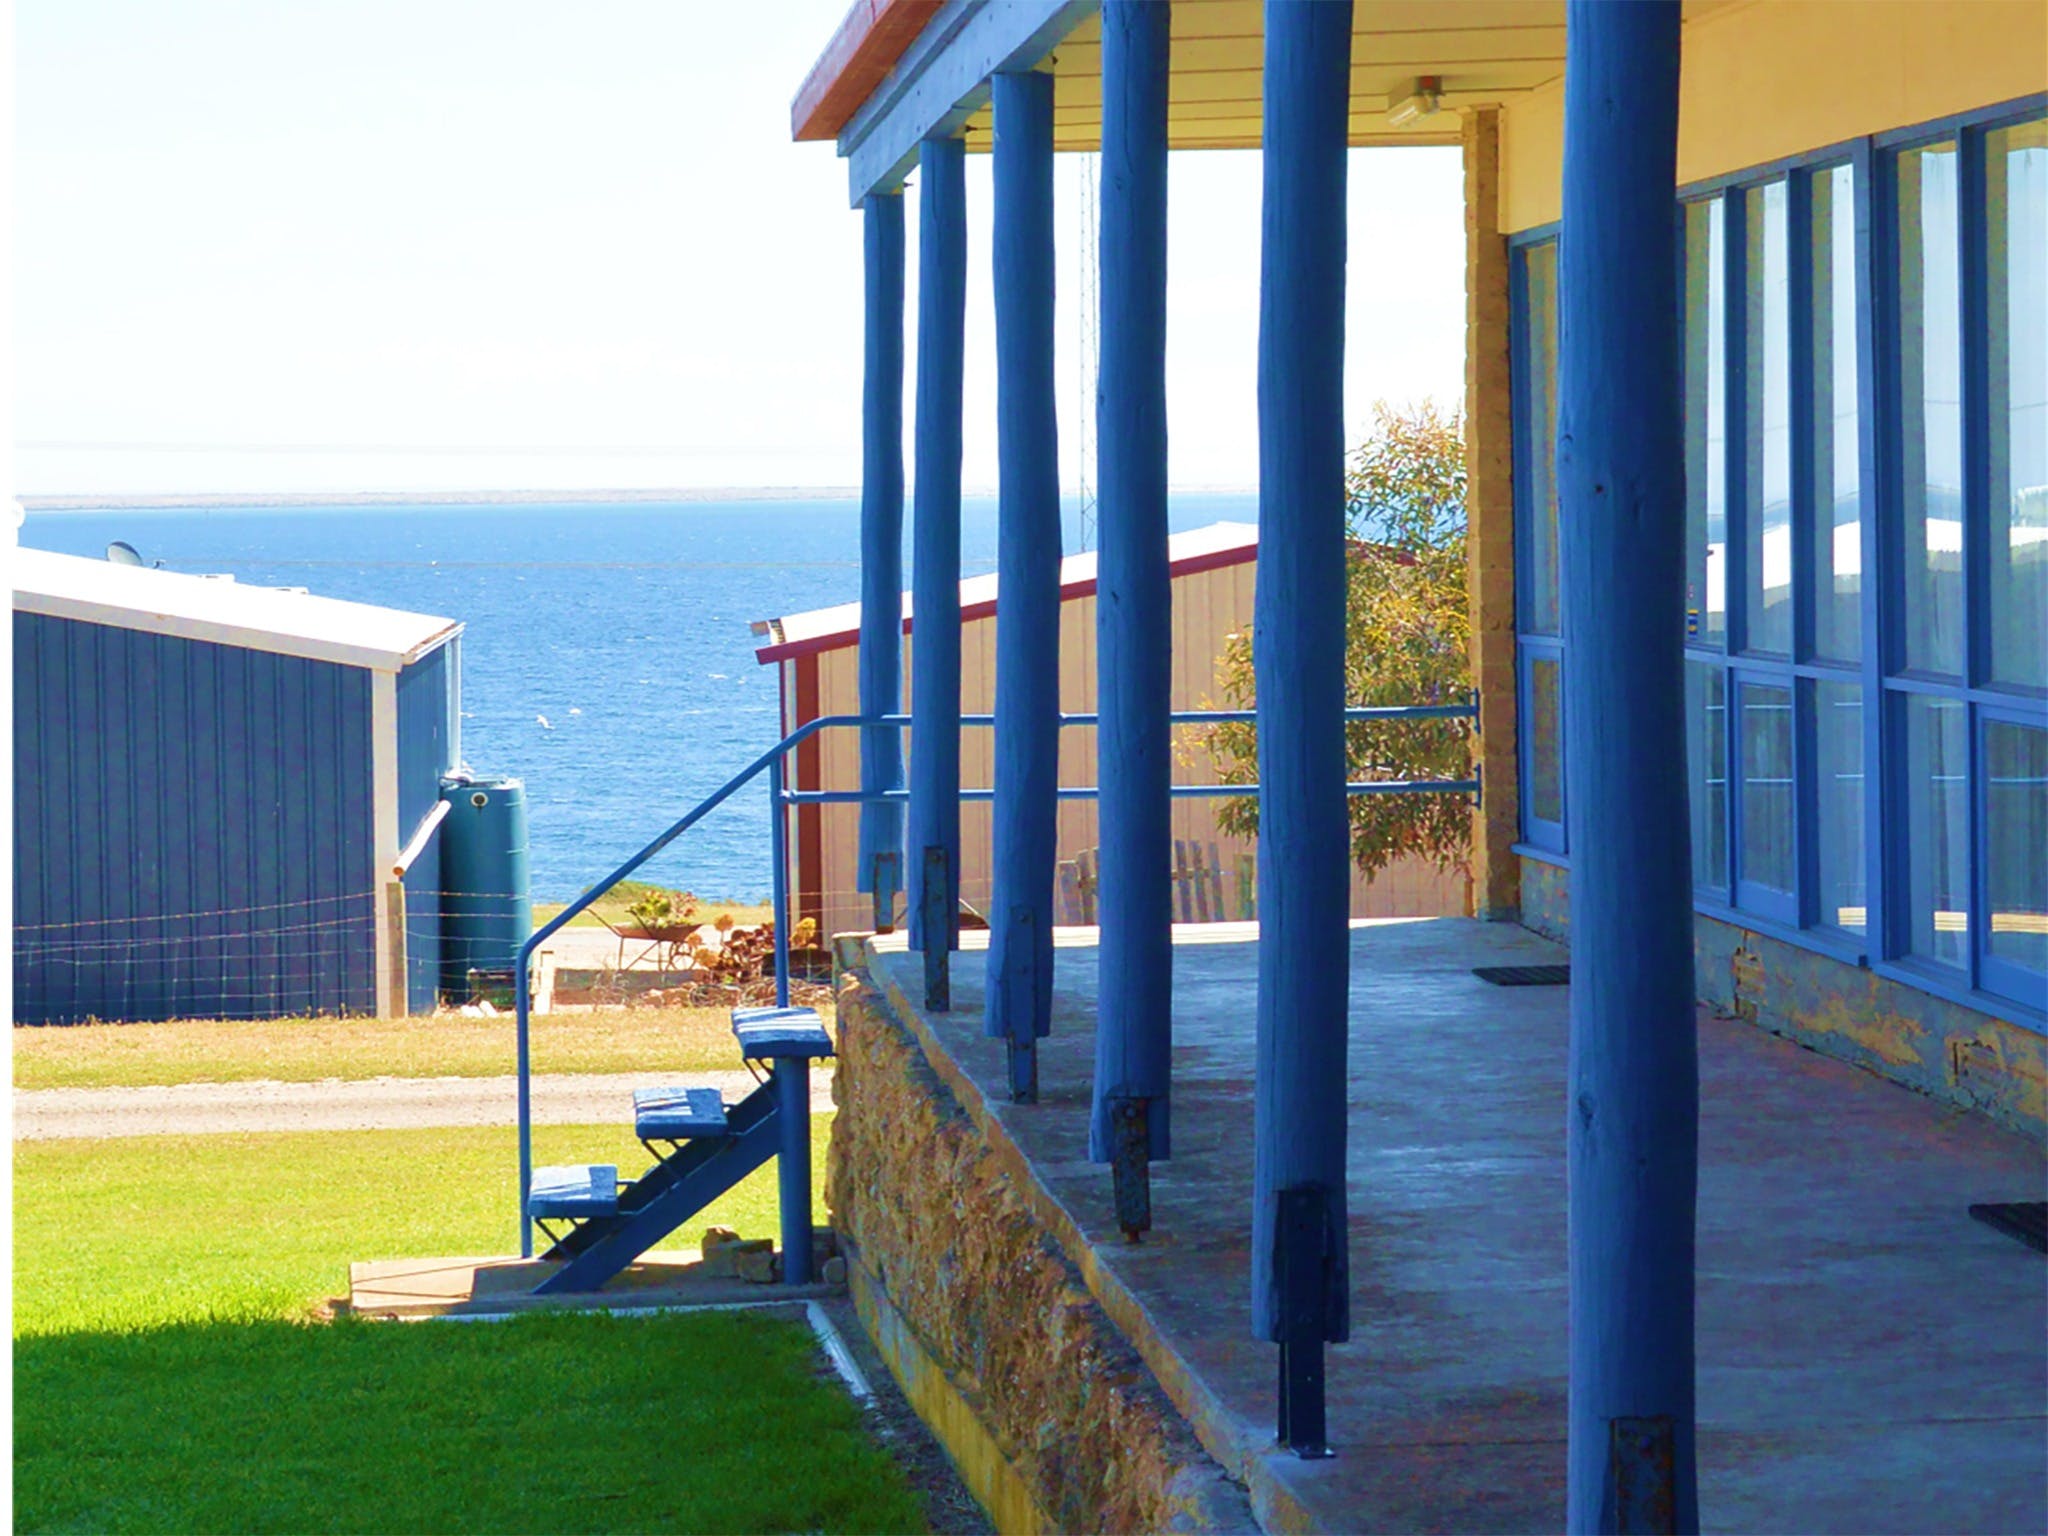 Island View Holiday Apartments - Coogee Beach Accommodation